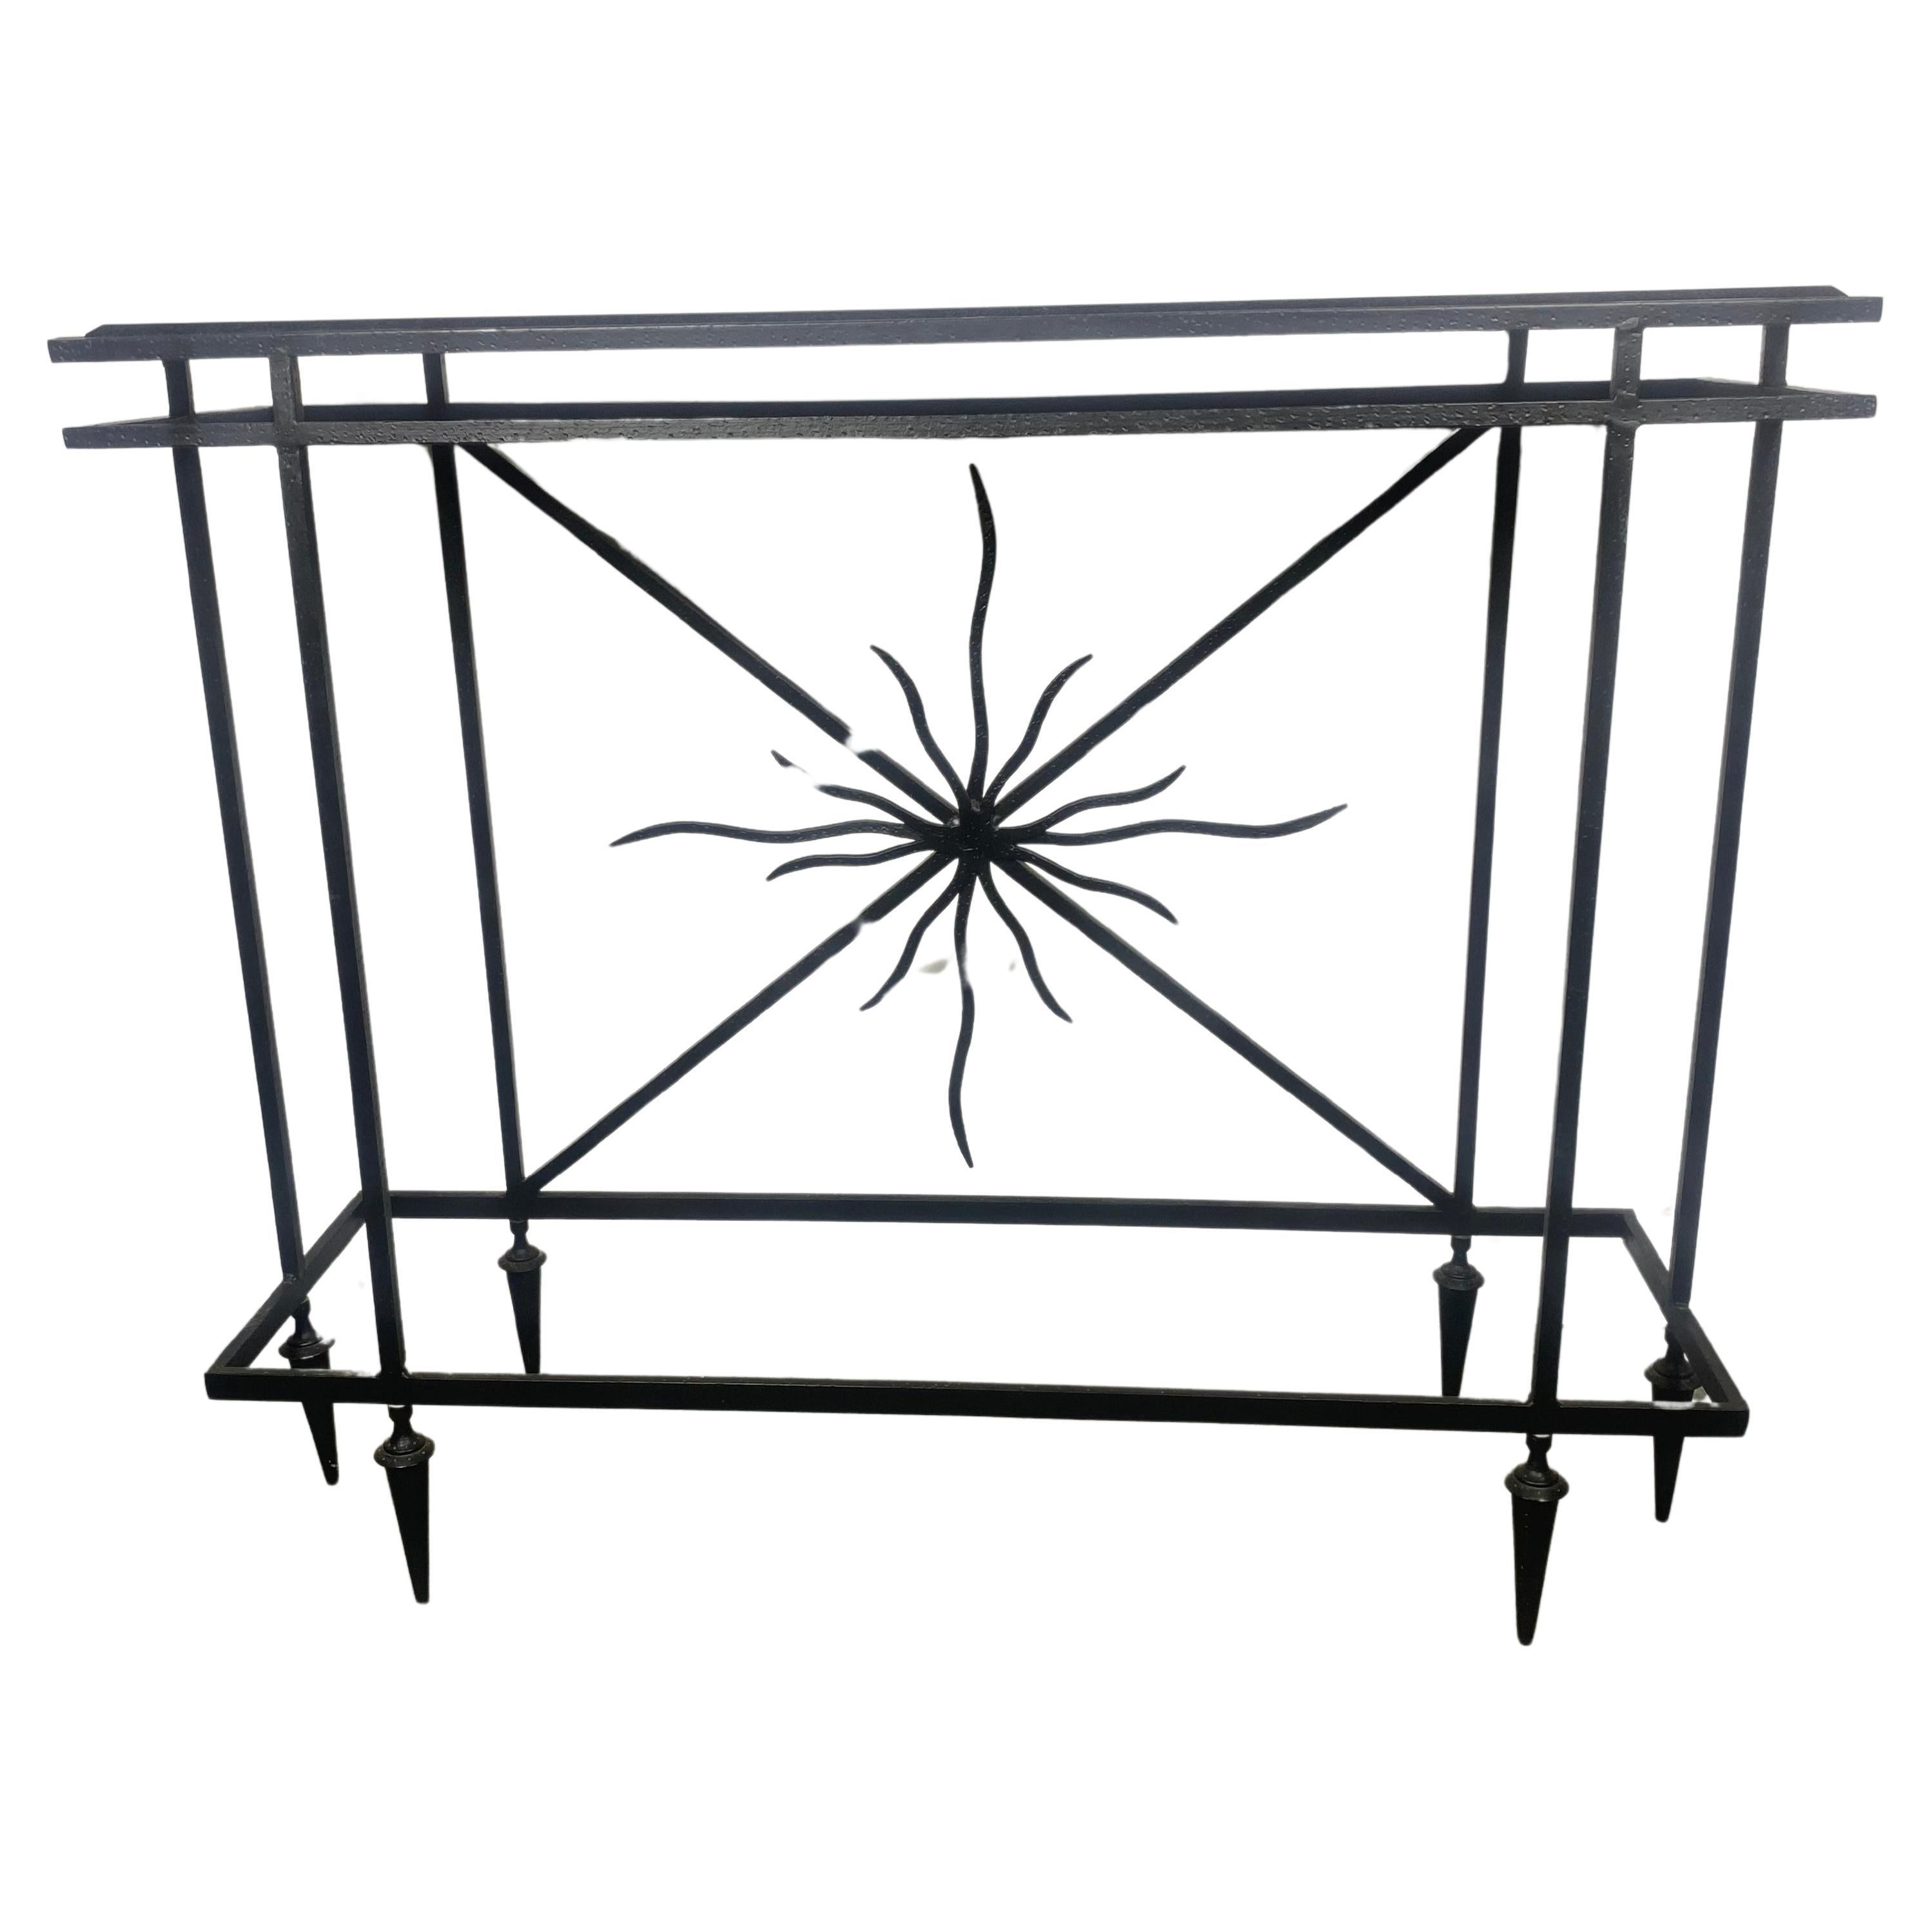 Italian Post Modernist Iron and Marble Console Table , manner of Gio Ponti For Sale